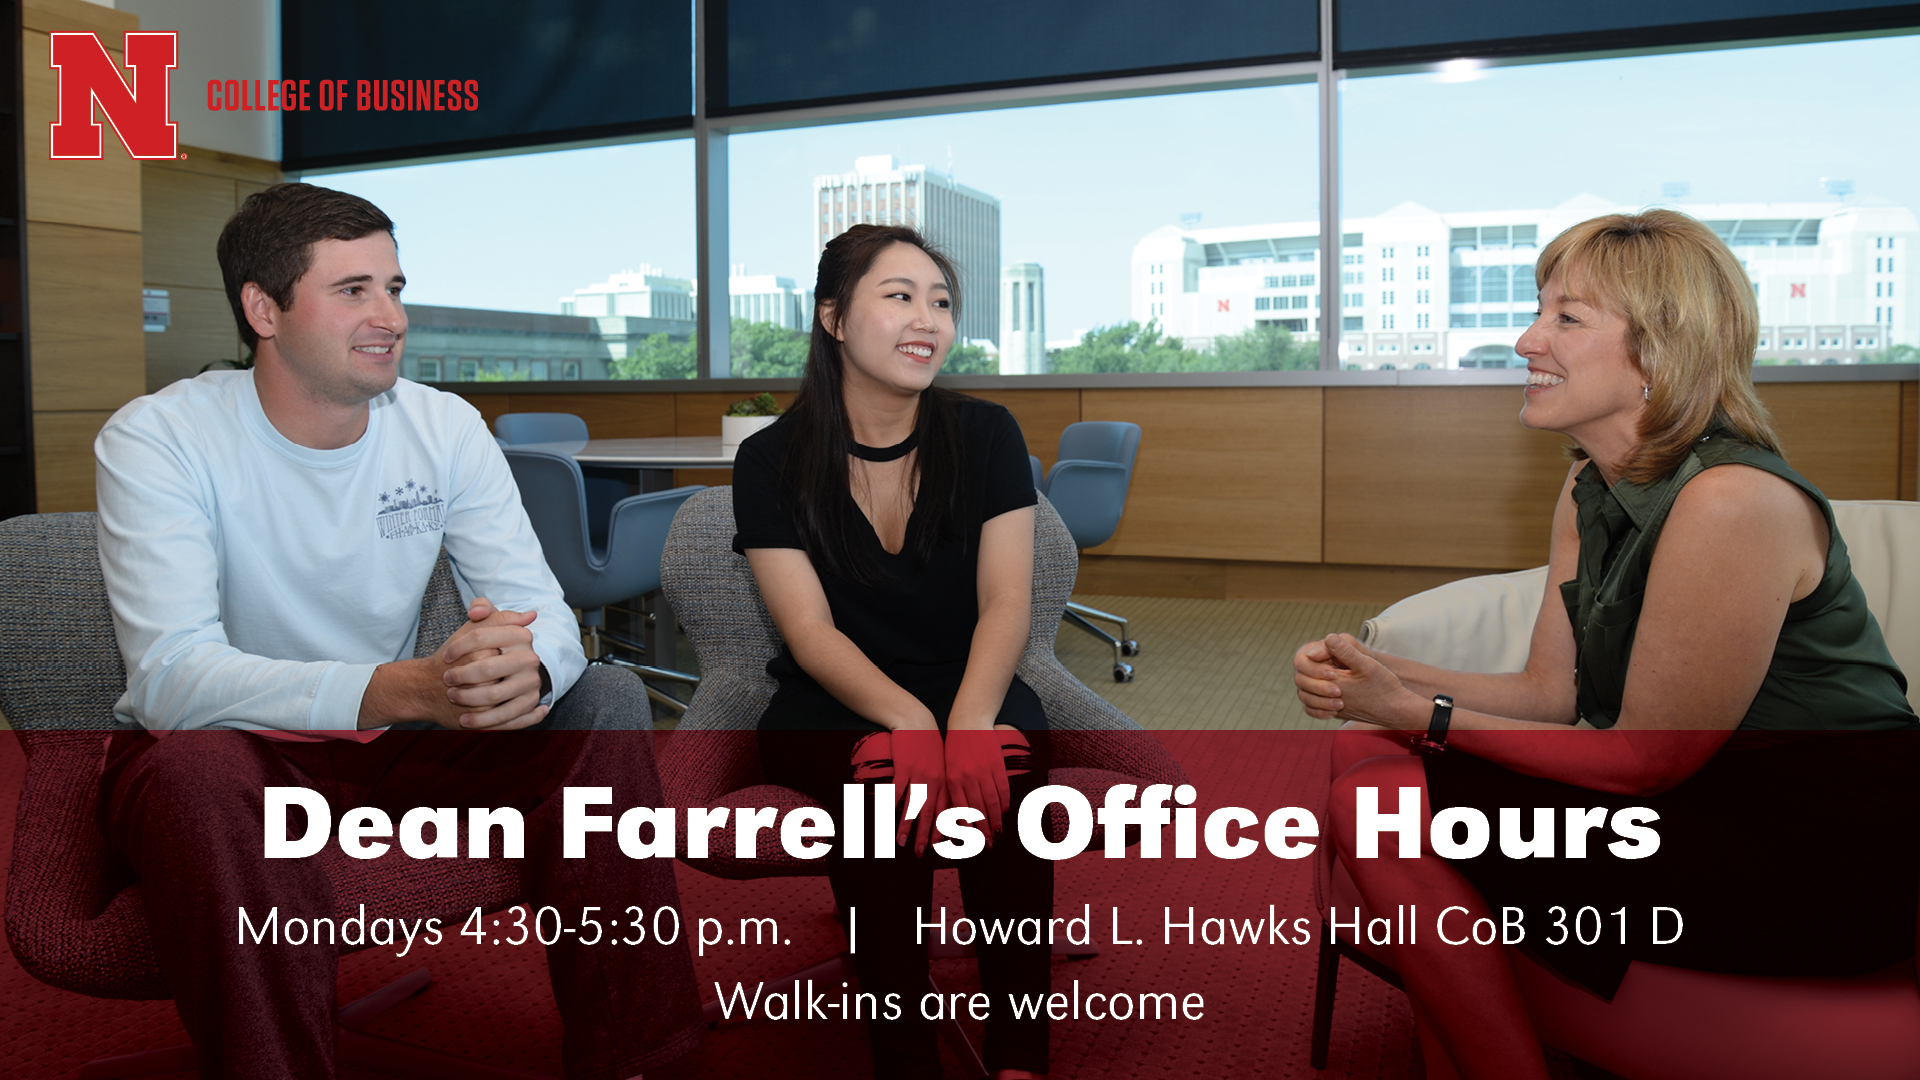 Stop by to talk with Dean Farrell